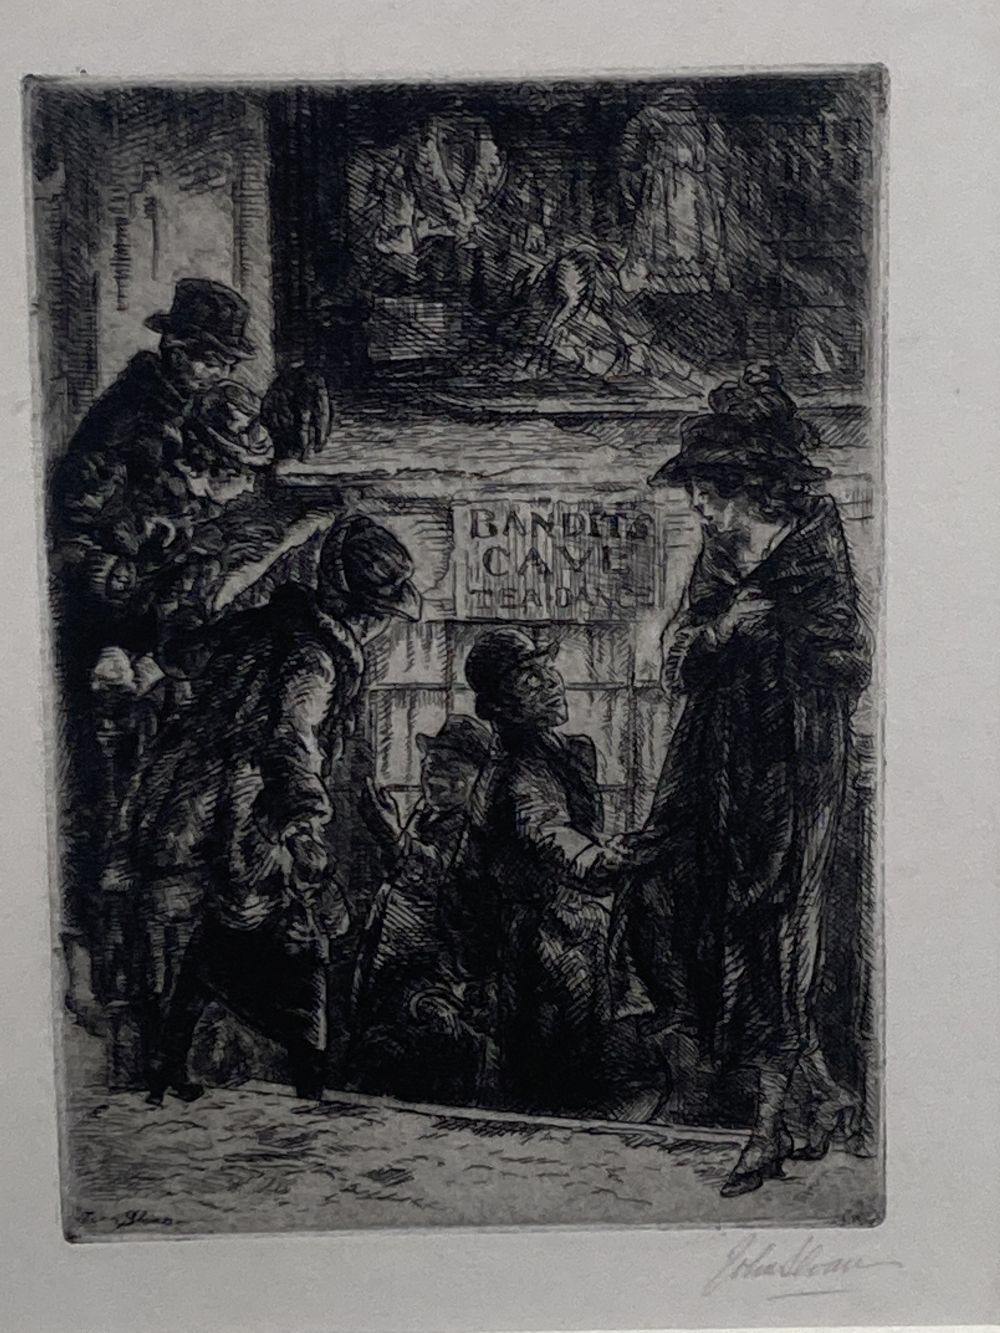 John Sloan (1871-1951, American), etching on wove paper, Bandits Cave 1920 (Morse 195), signed in pencil, 17 x 12cm